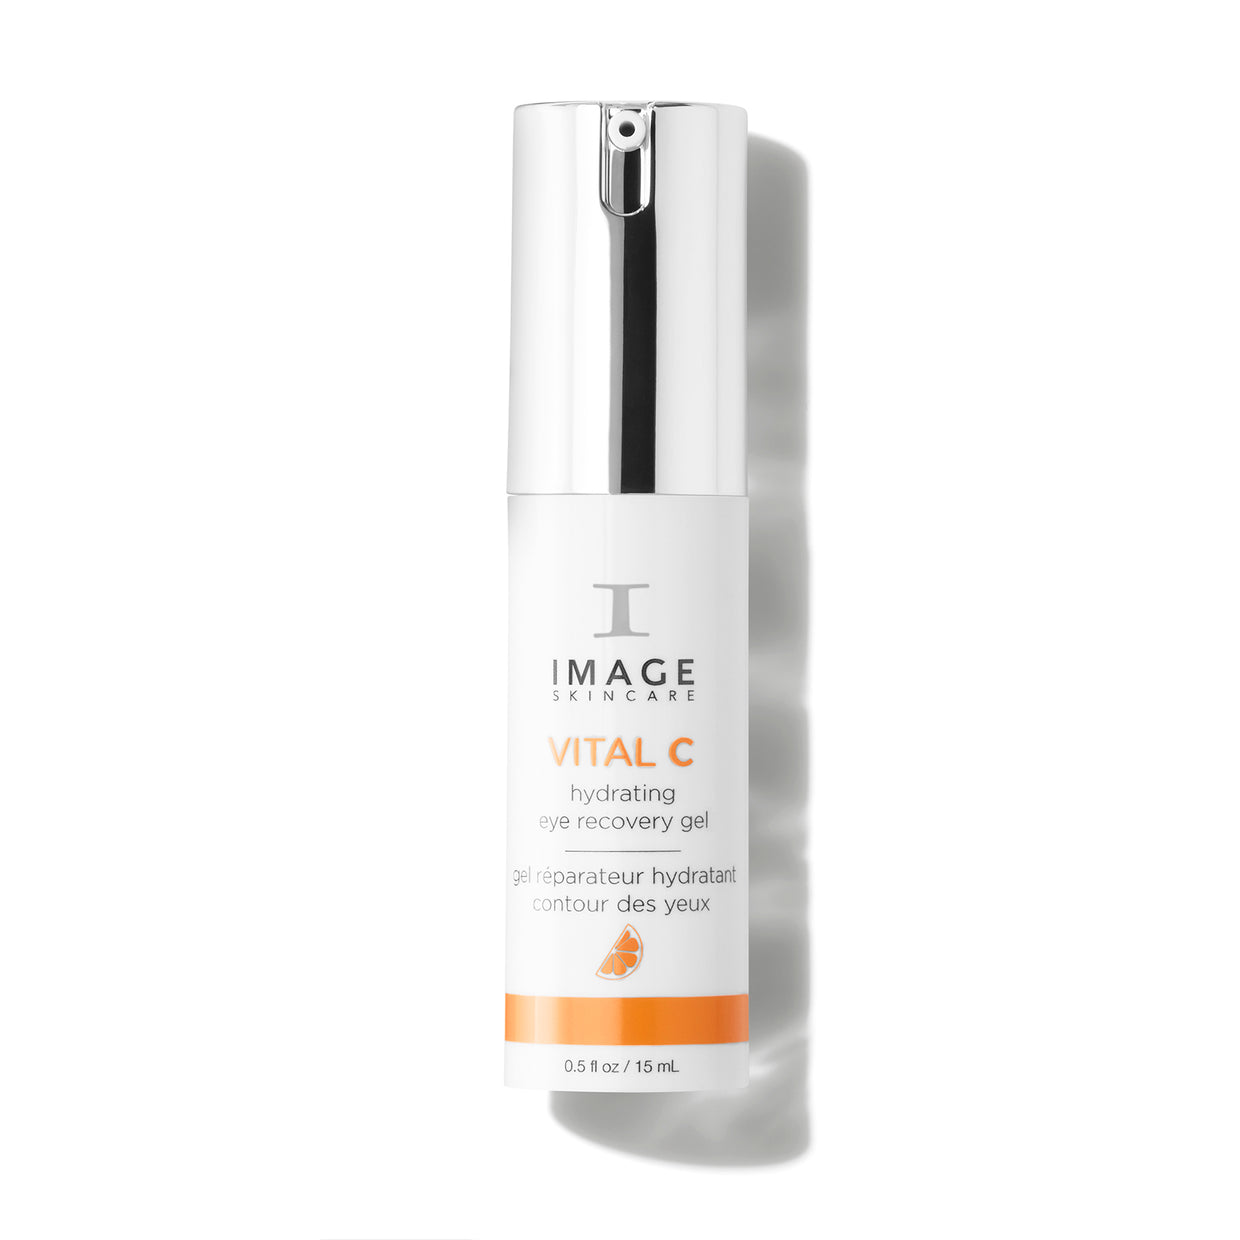 Image Skincare Vital C Hydrating Eye Recovery Gel Shop At Exclusive Beauty